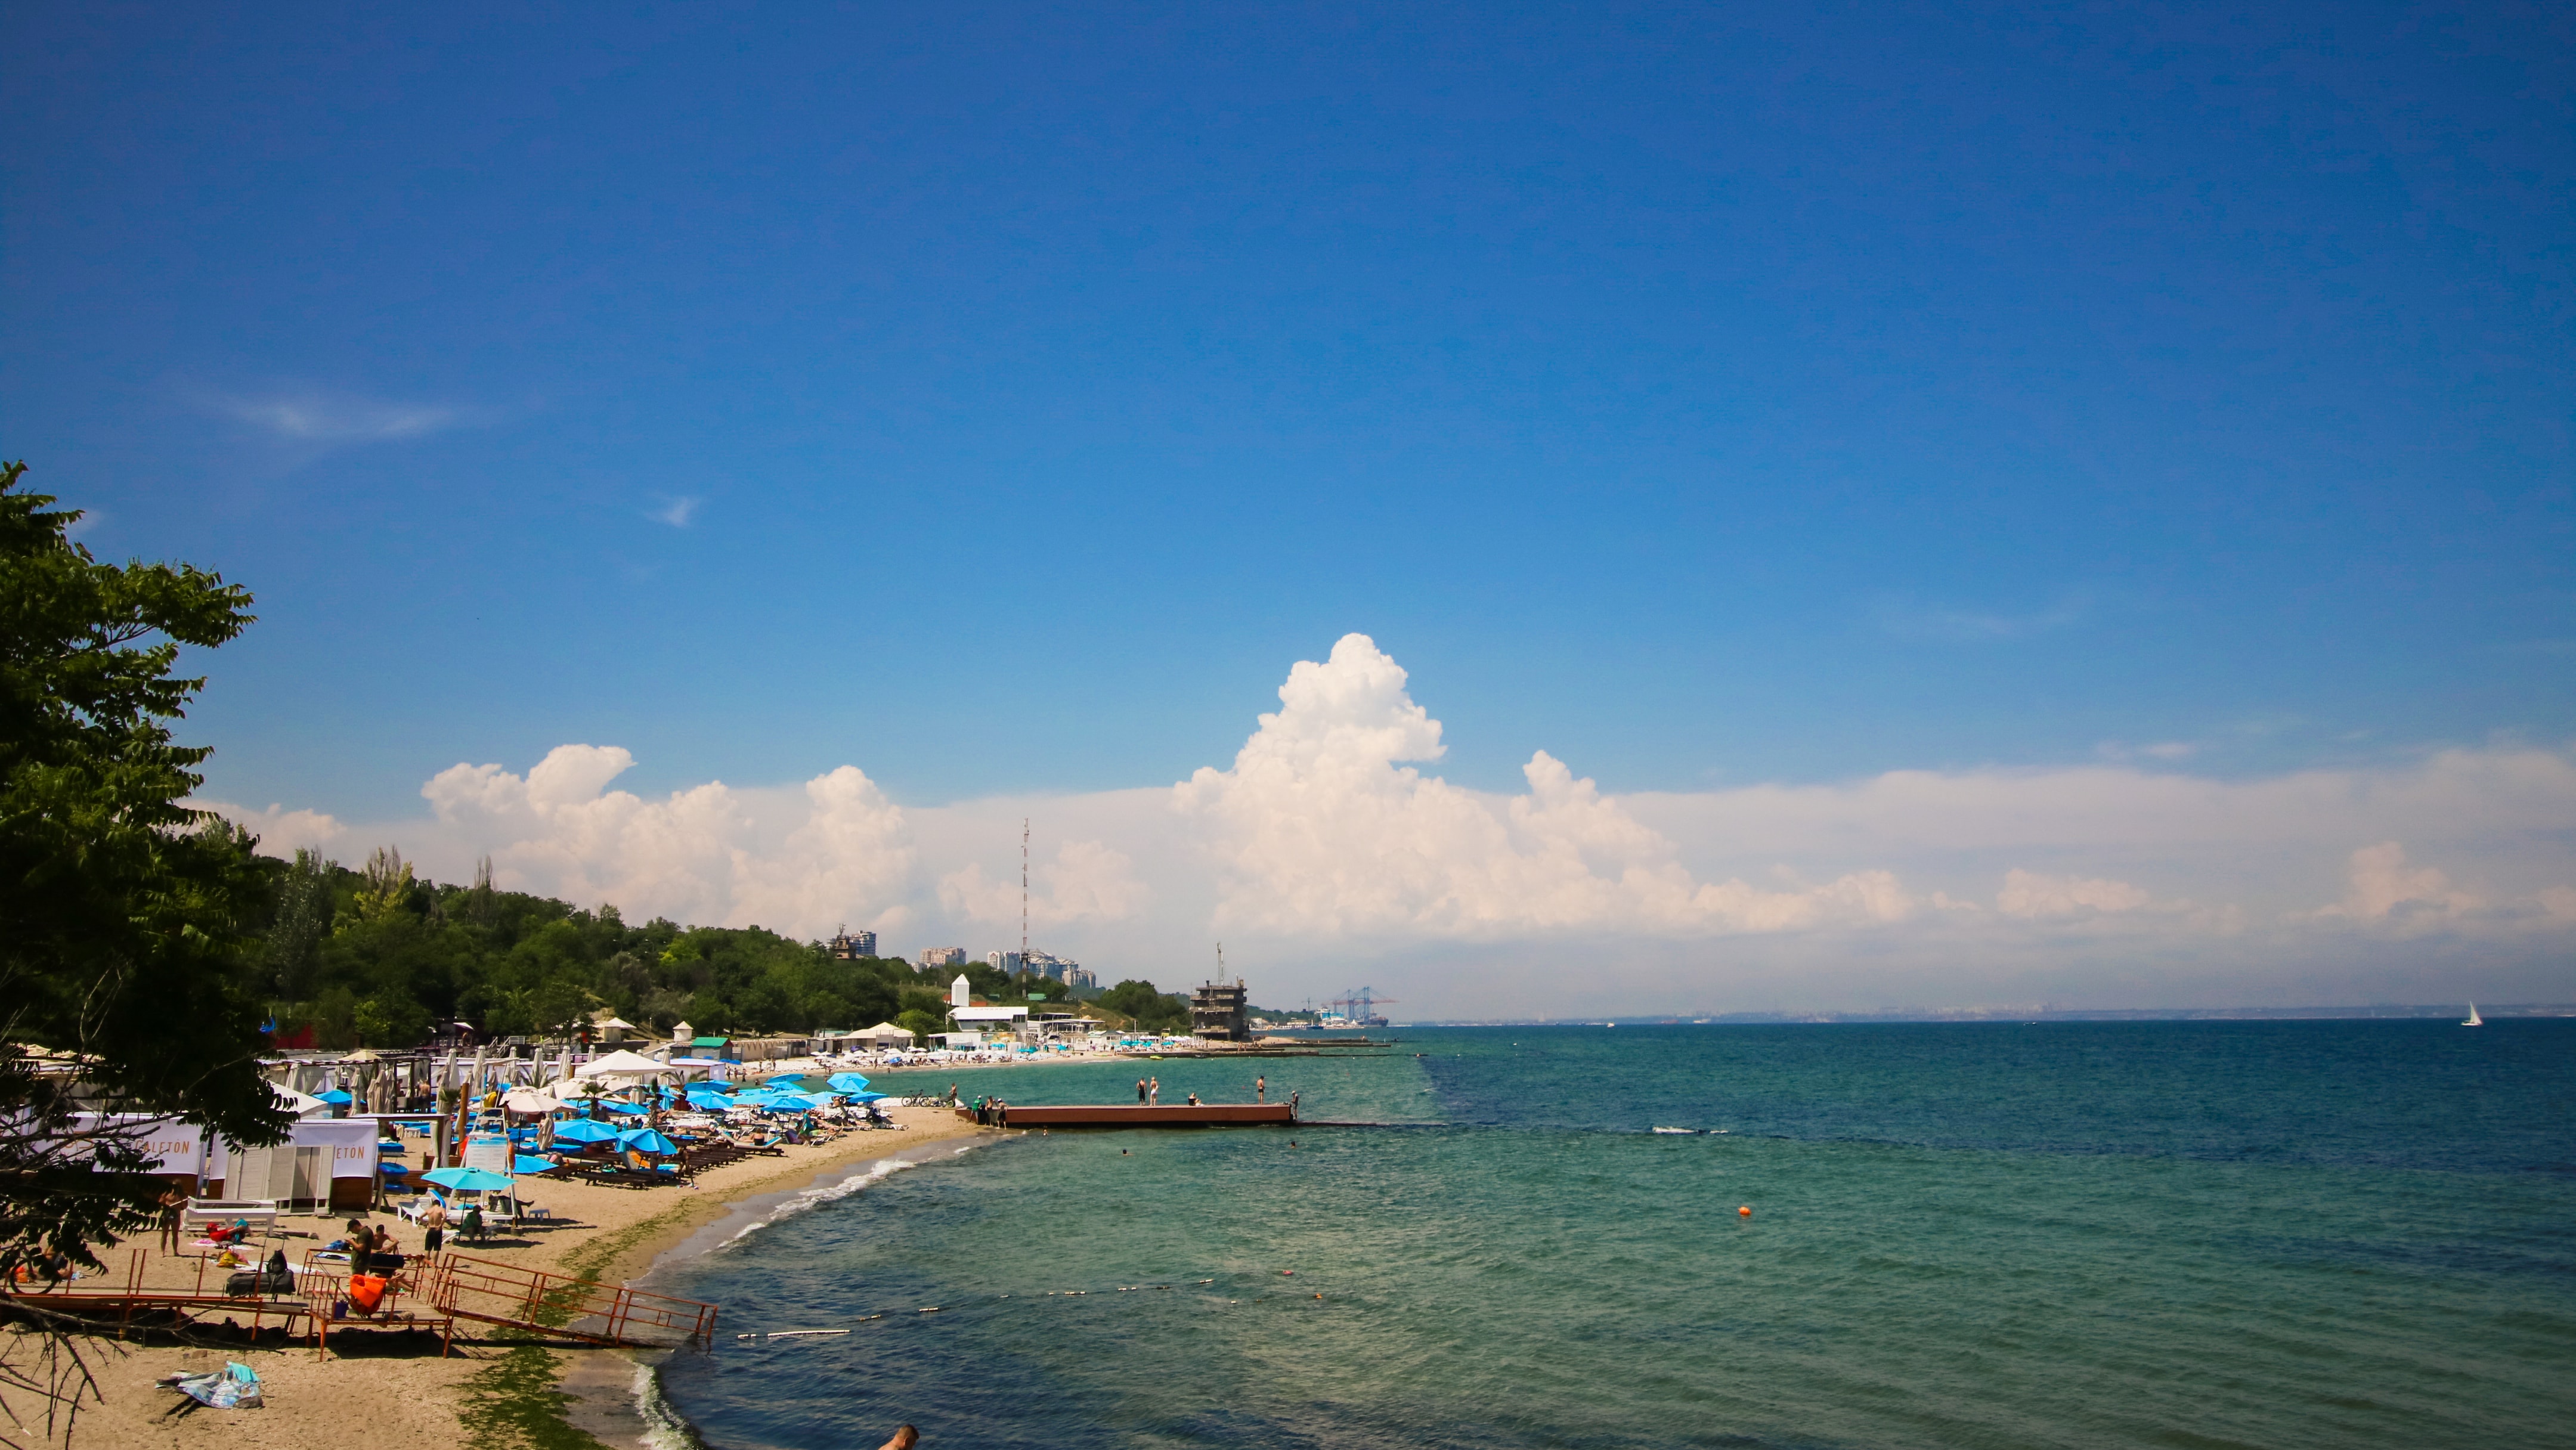 SHORT GUIDE TO FIND PERSONALLY THE BEST BEACH IN ODESSA